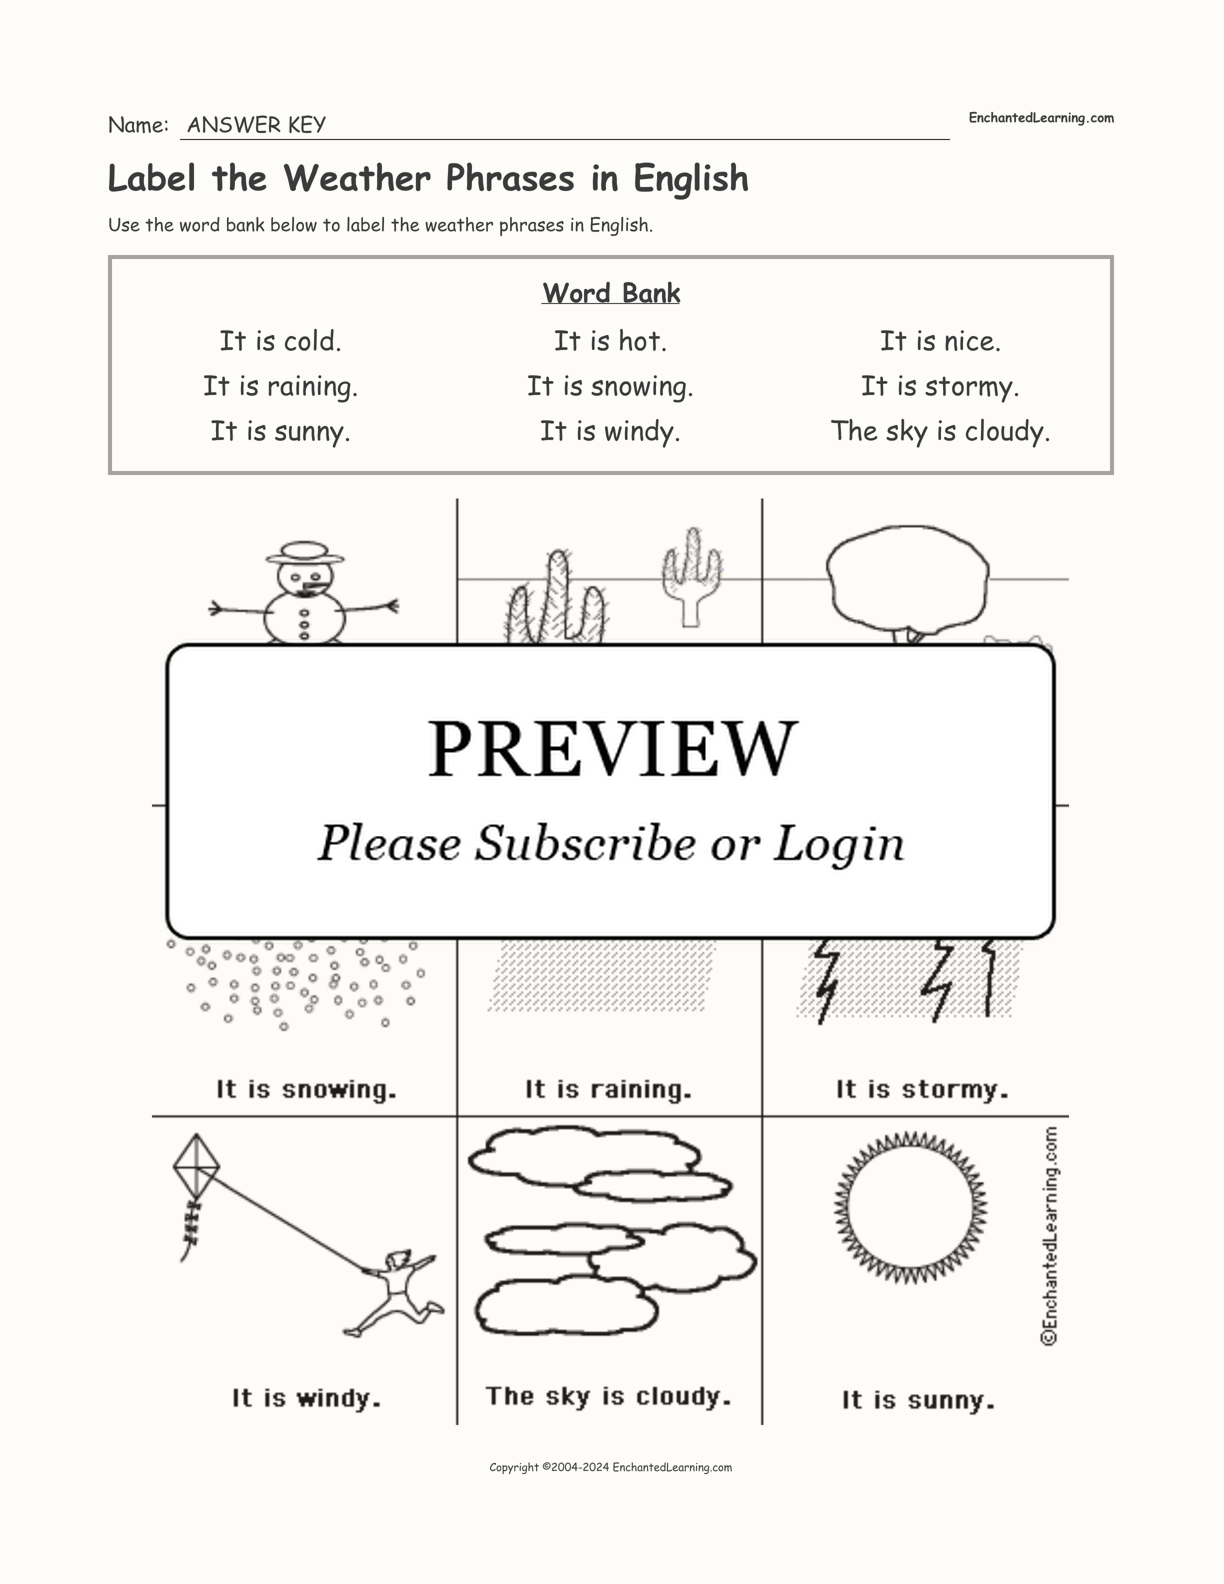 Label the Weather Phrases in English interactive worksheet page 2